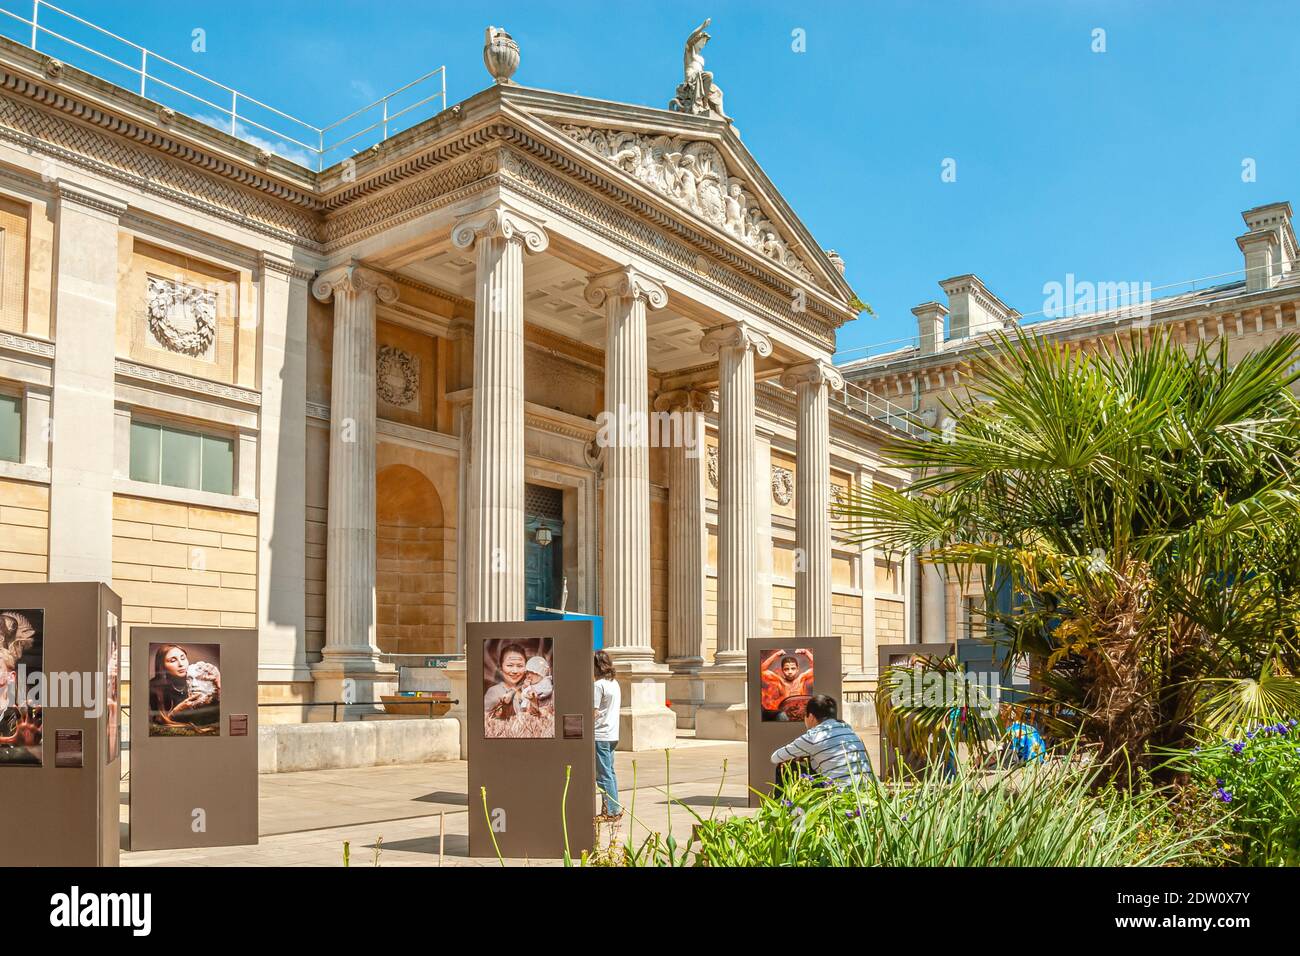 Ashmolean Museum of Art & Archeology in Oxford, Oxfordshire, England Stock Photo